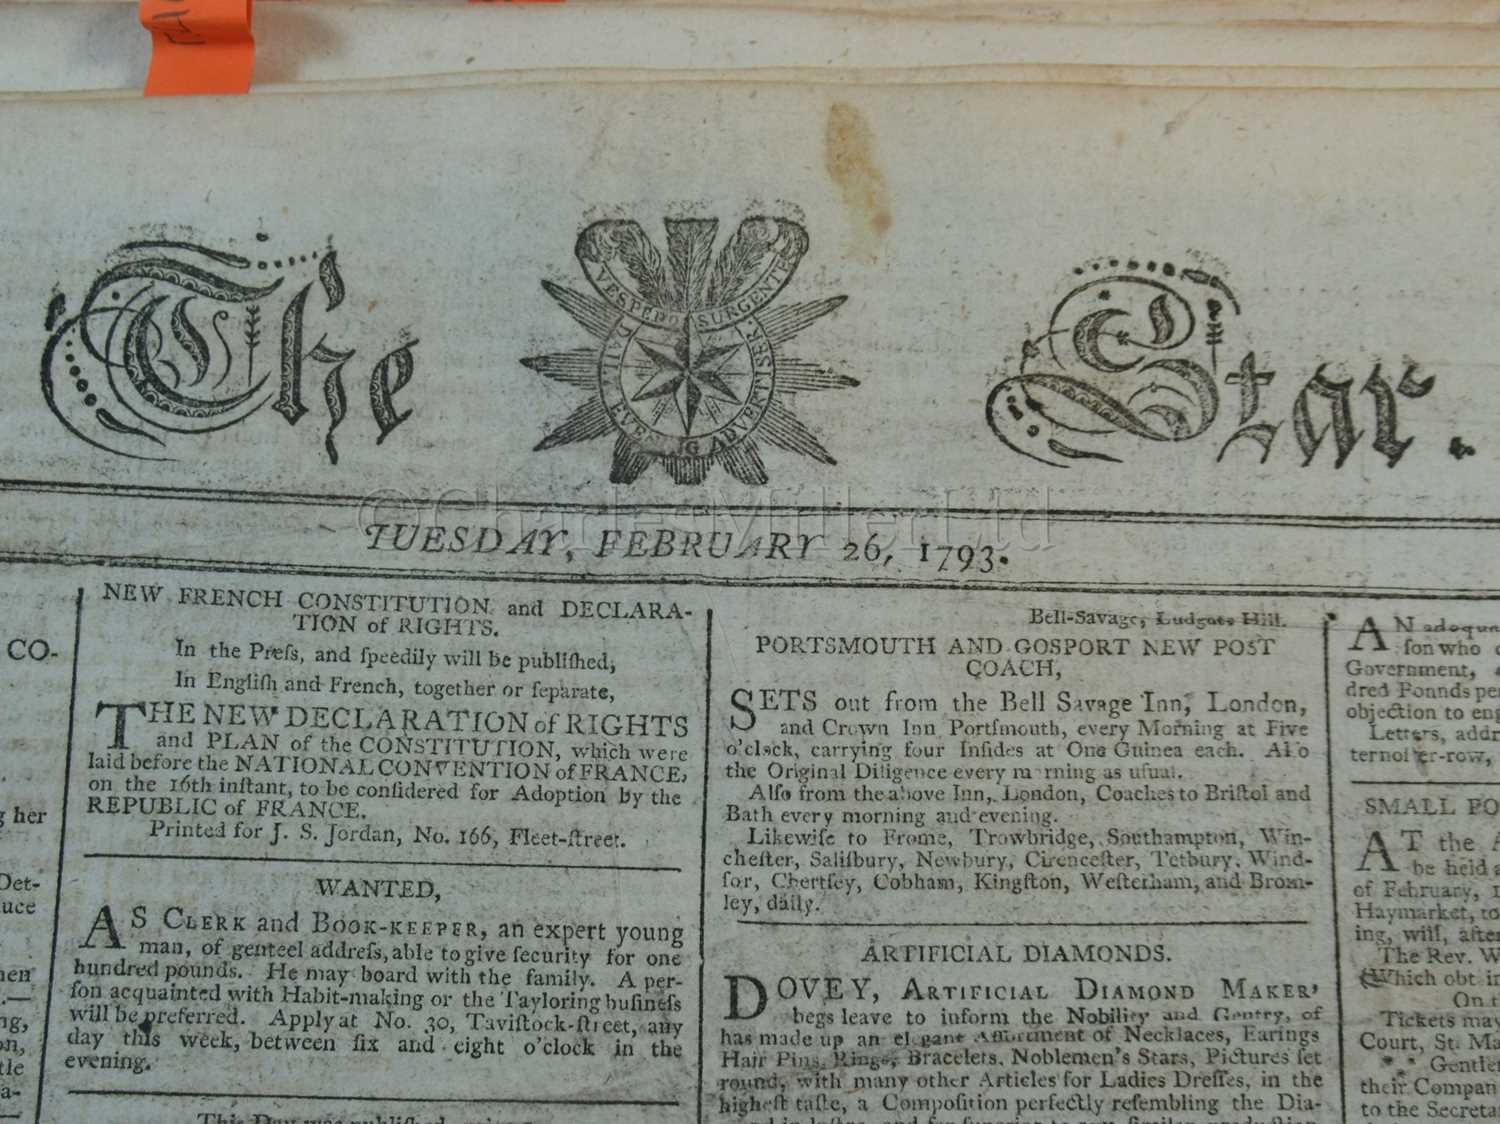 Lot 47 - THE STAR: ACCOUNTS OF CAPTAIN BLIGH, 1793